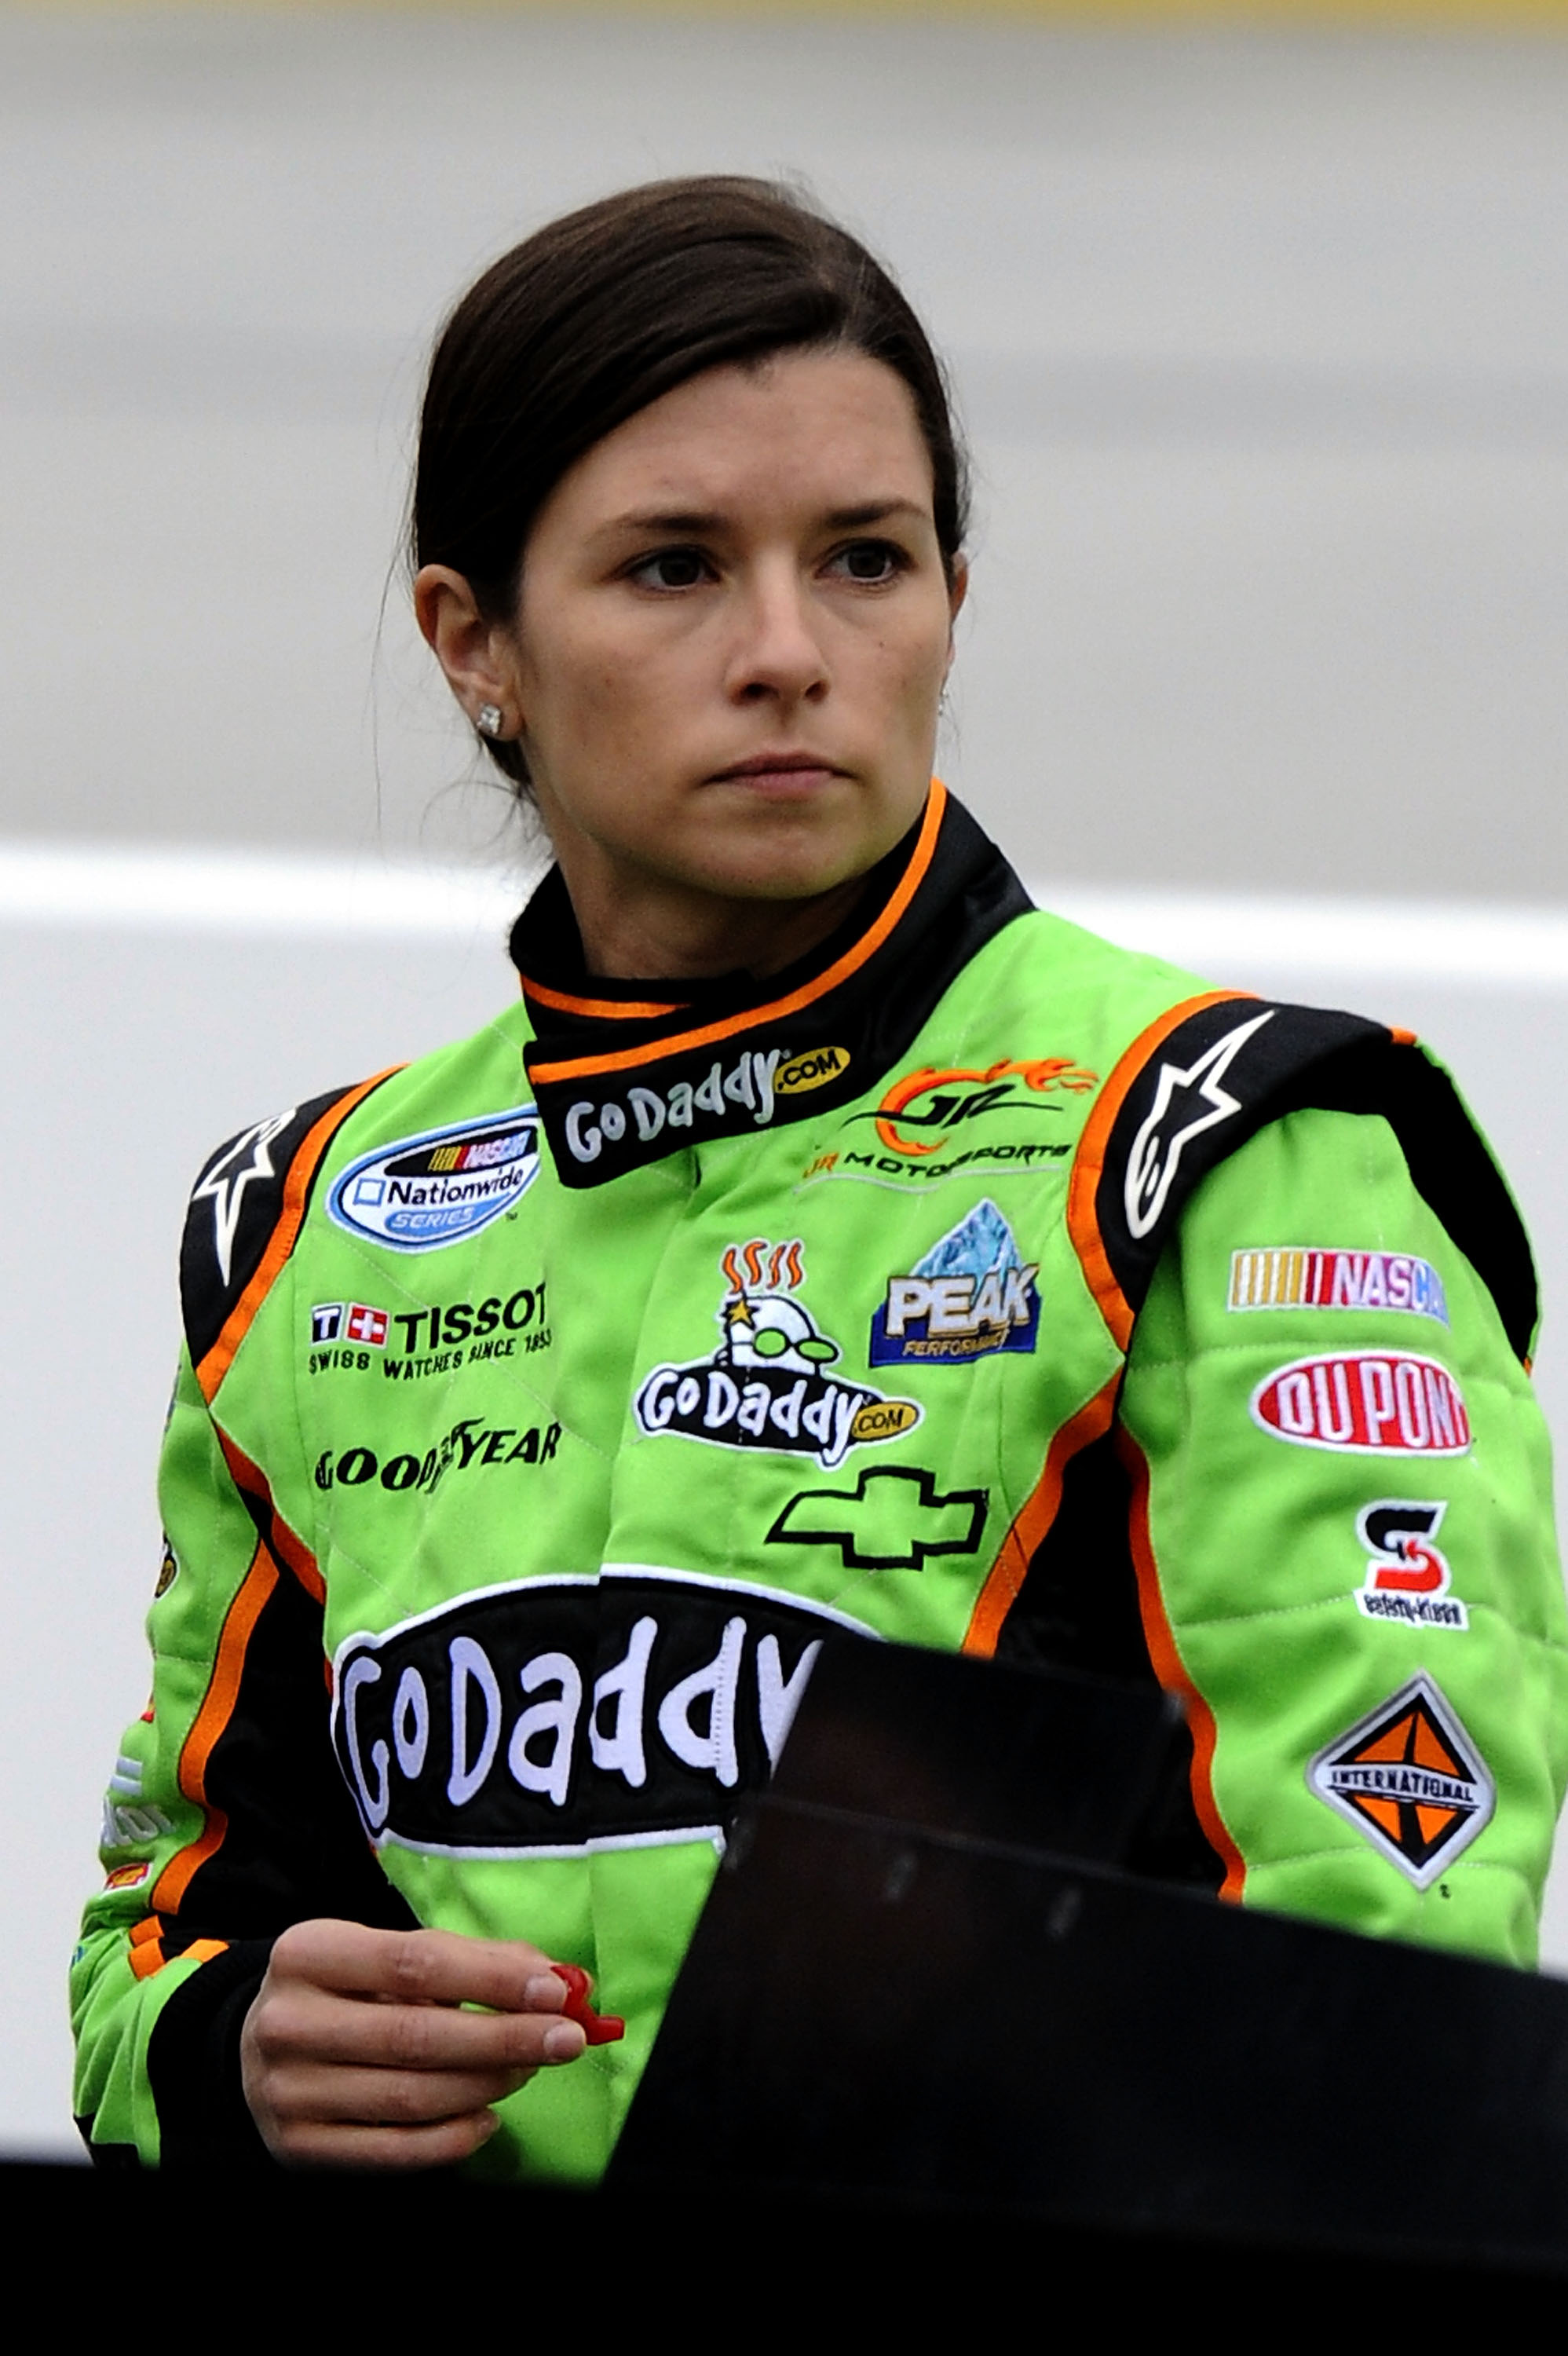 BRISTOL, TN - MARCH 18:  Danica Patrick, driver of the #7 GoDaddy.com Chevrolet, stands in the garage area during practice for the NASCAR Nationwide Series Scotts EZ Seed 300 at Bristol Motor Speedway on March 18, 2011 in Bristol, Tennessee.  (Photo by Jo